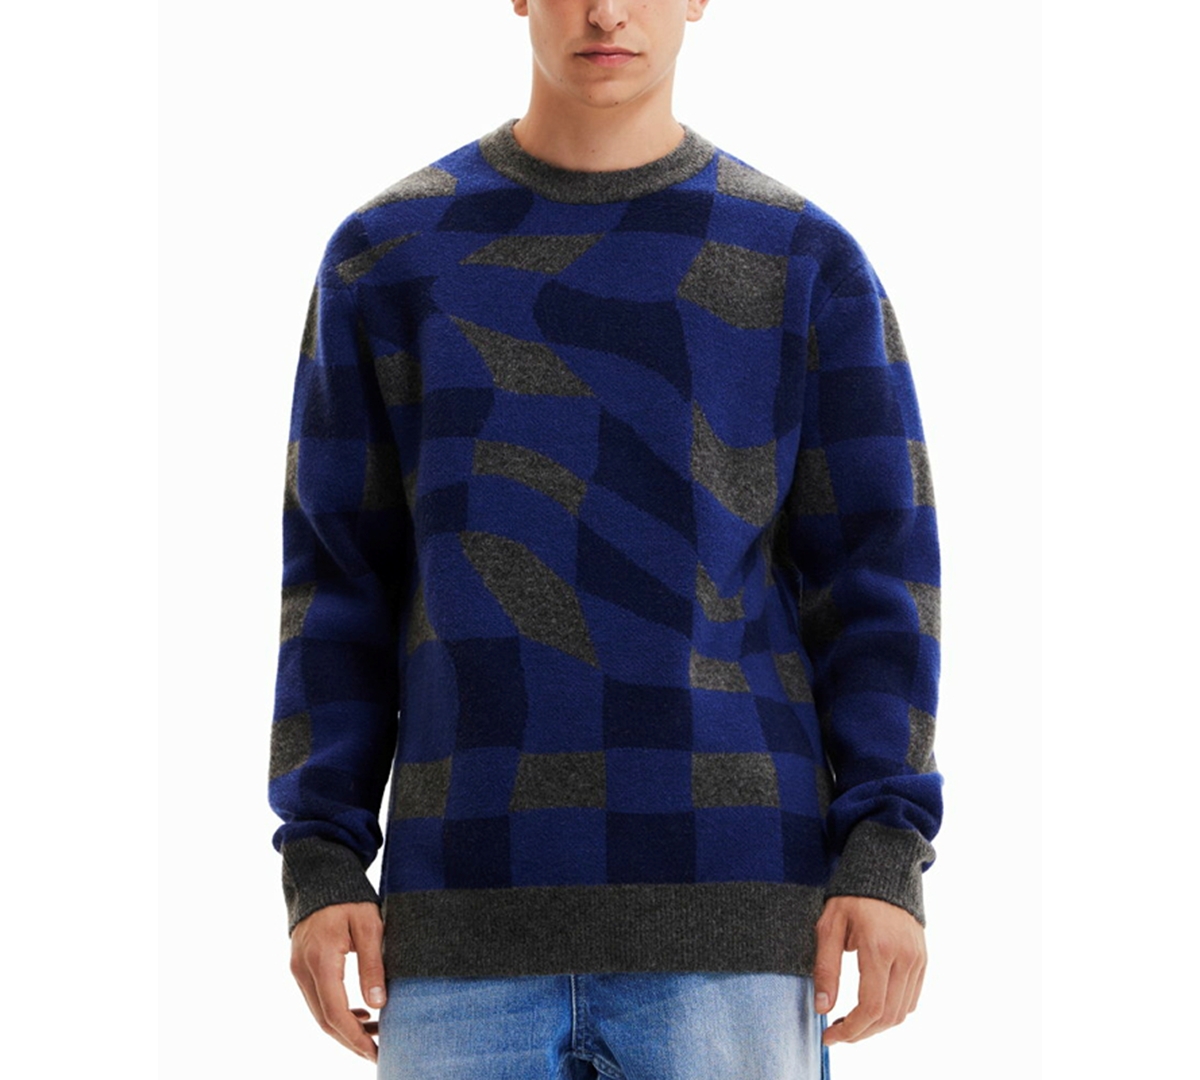 Desigual Men's Relaxed-Fit Wave Check Crewneck Sweater